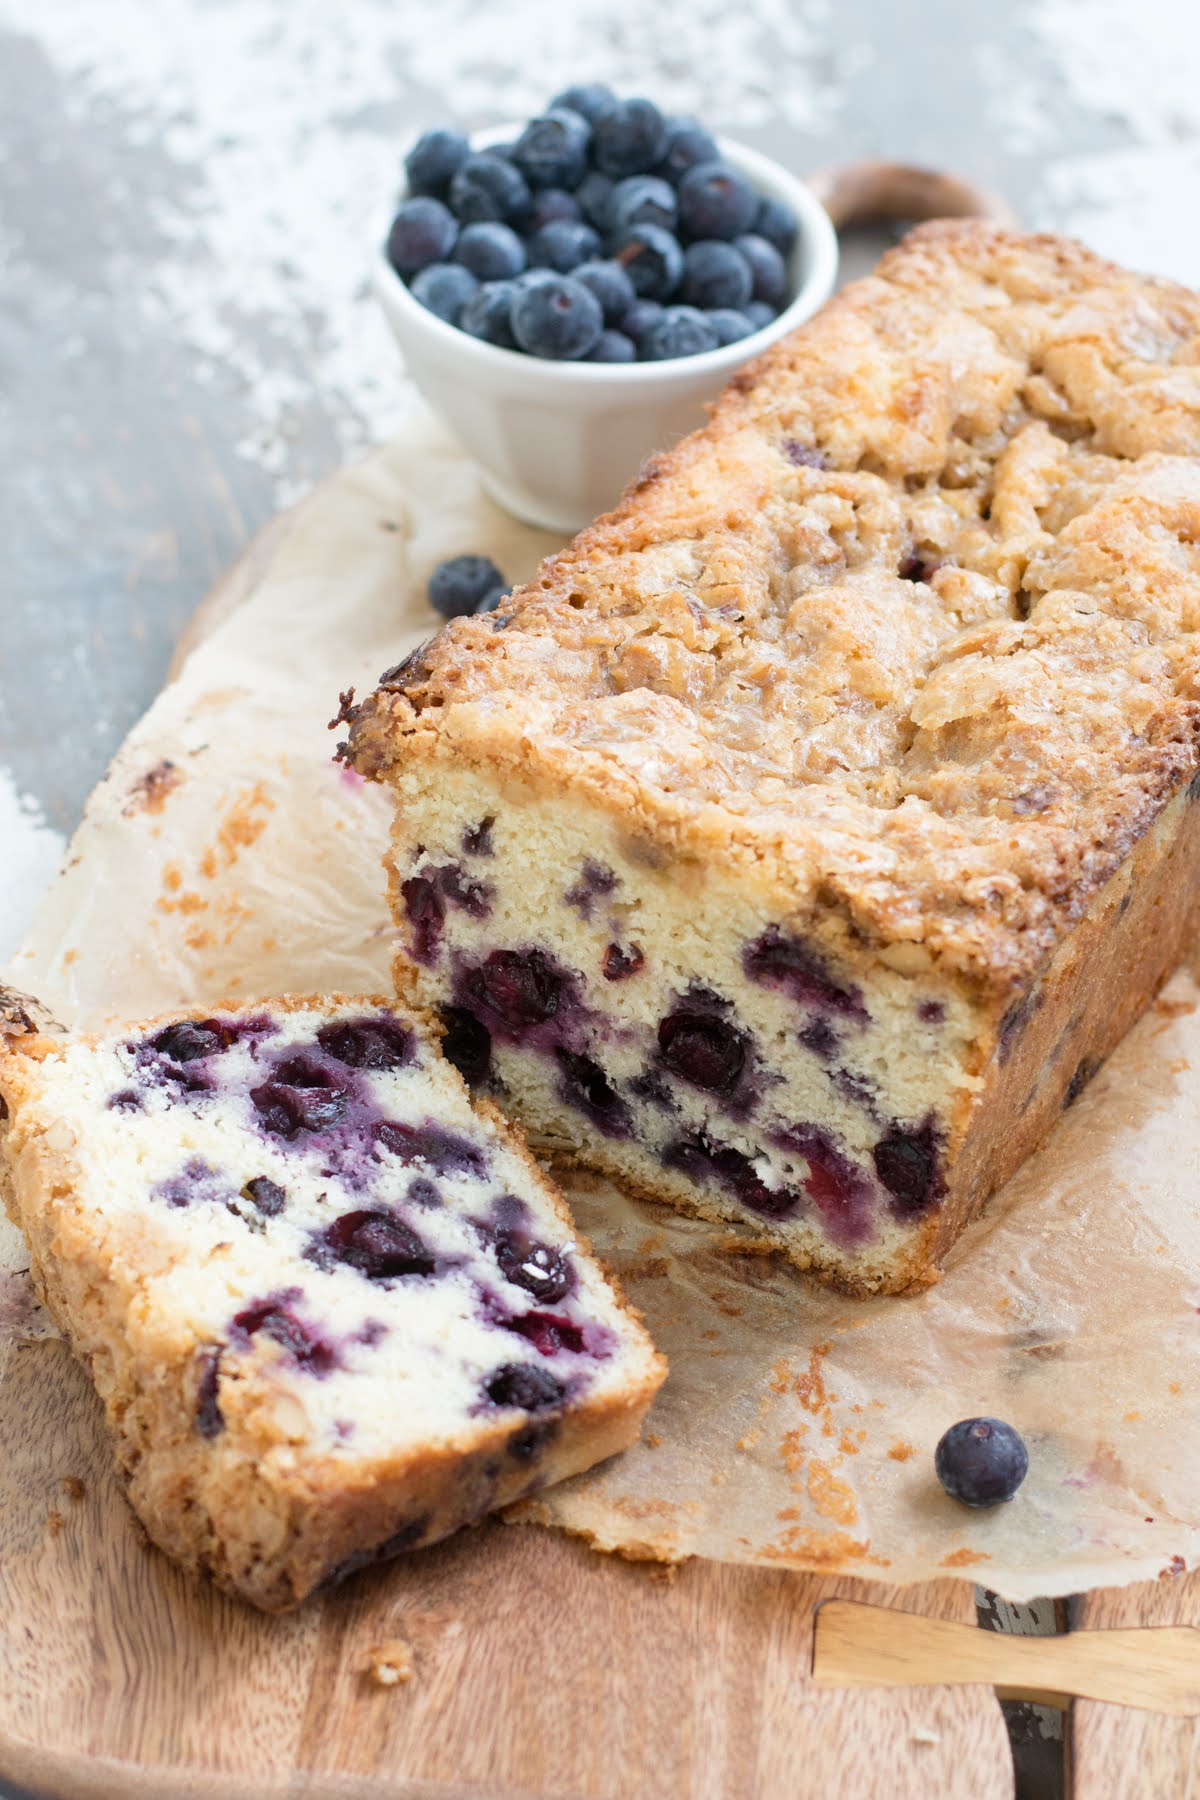 A blueberry loaf cake next to a cup of fresh blueberries.